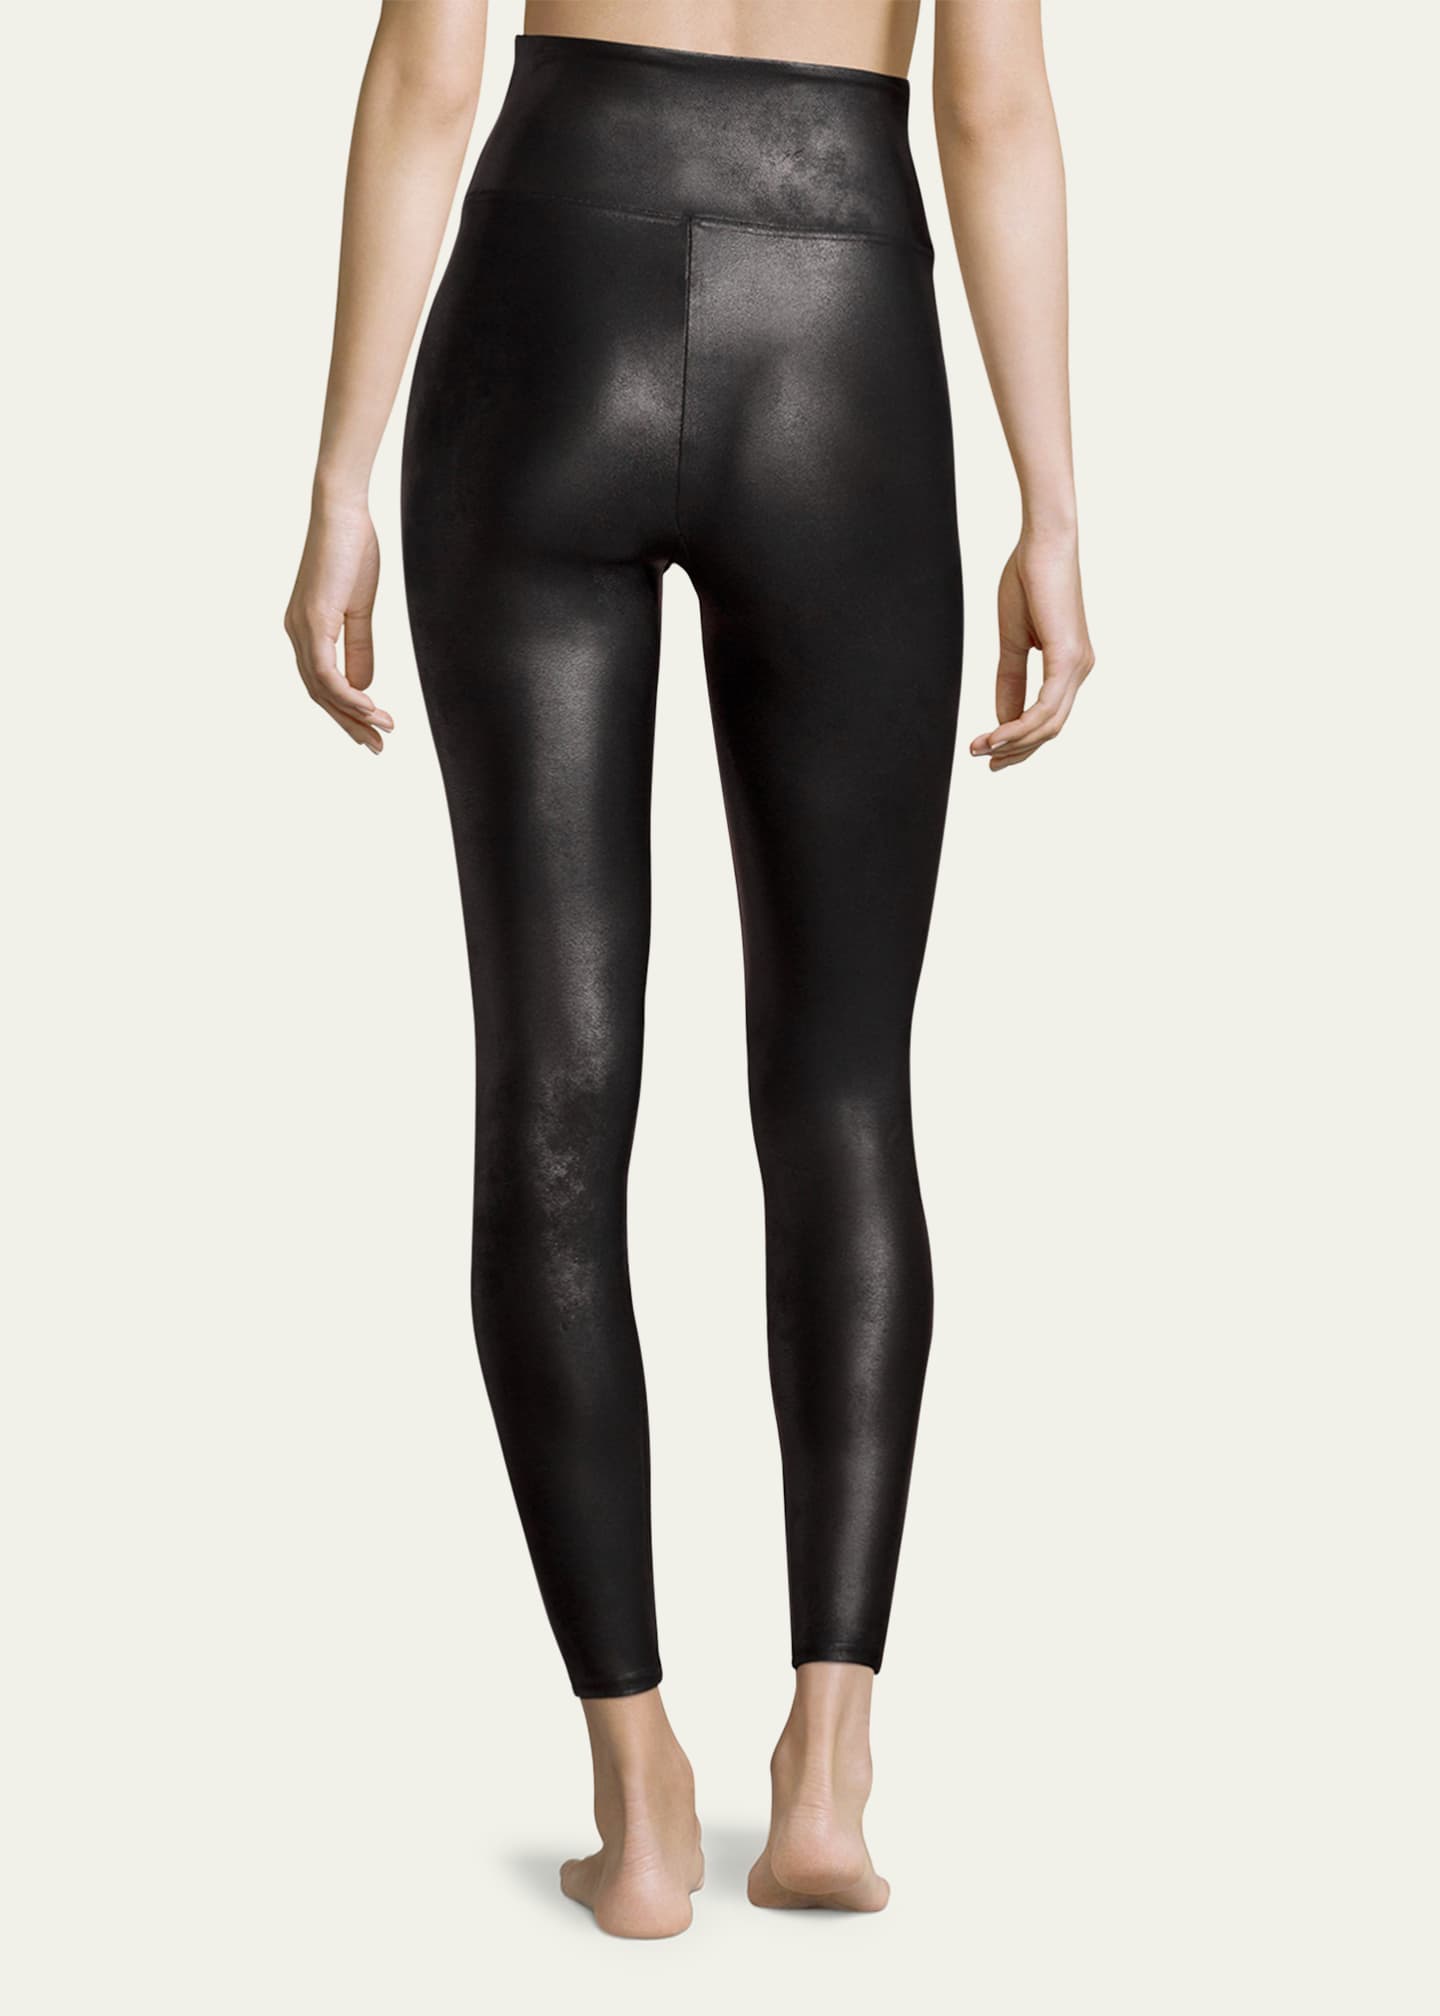 Spanx Ready-to-Wow Faux-Leather Leggings - Bergdorf Goodman